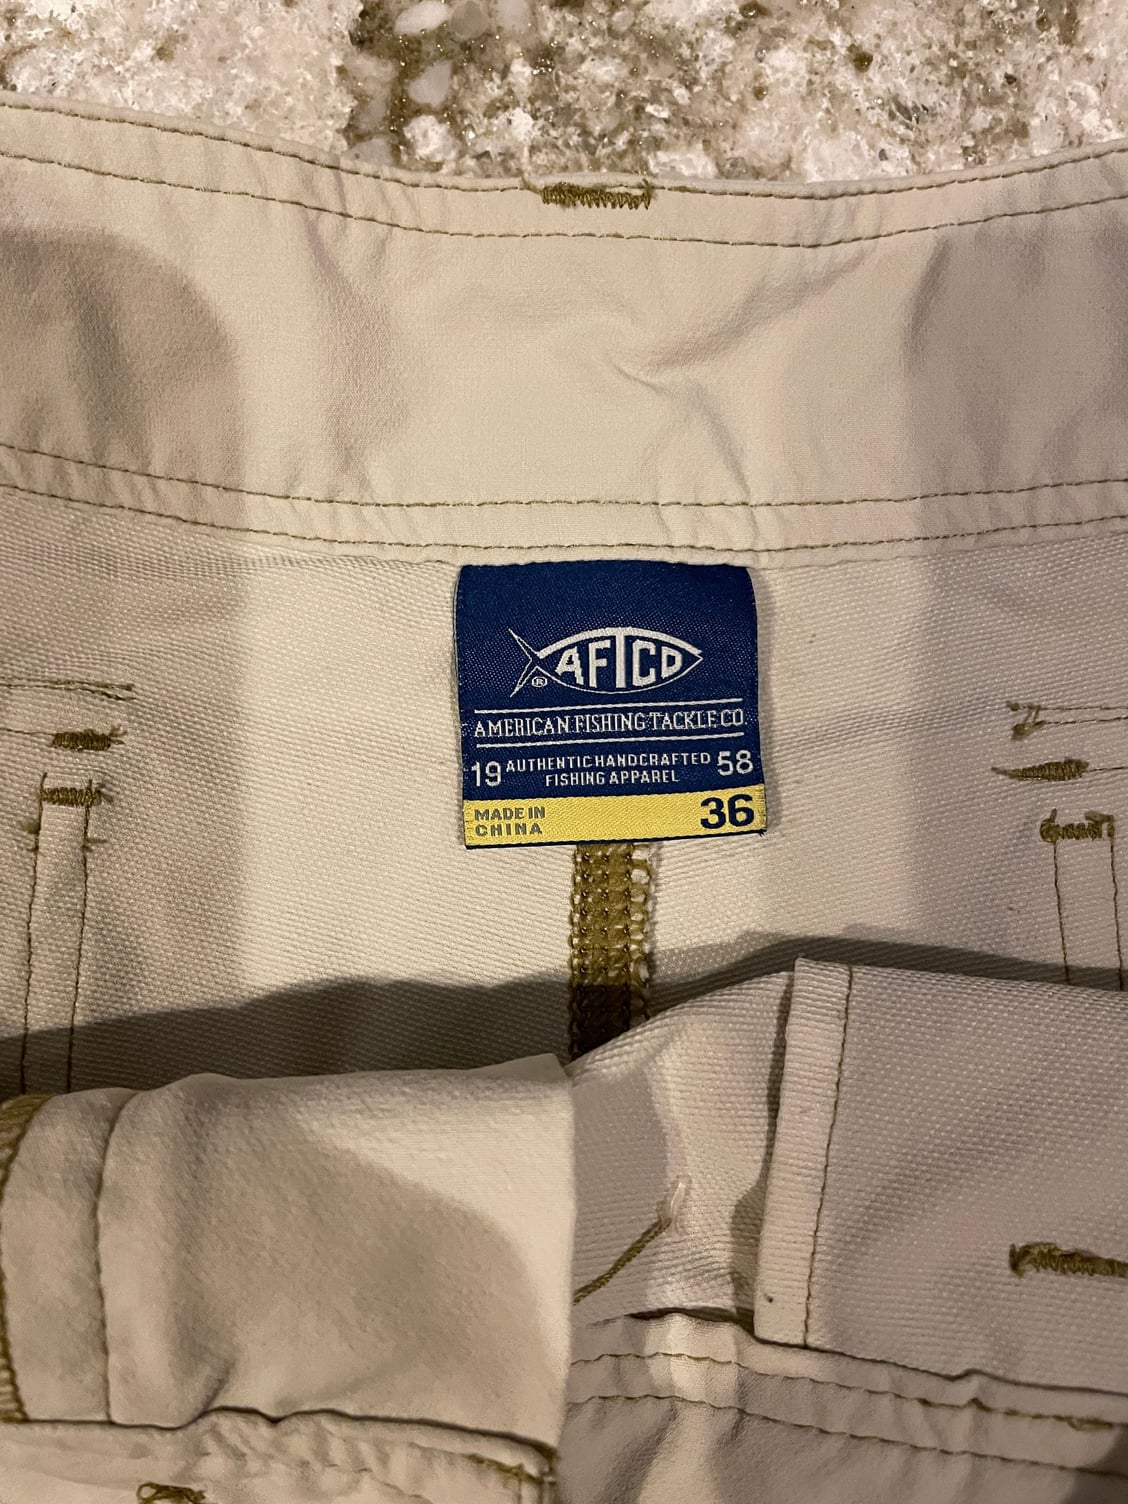 Aftco Fishing shorts - 2 pair - size 36 - The Hull Truth - Boating